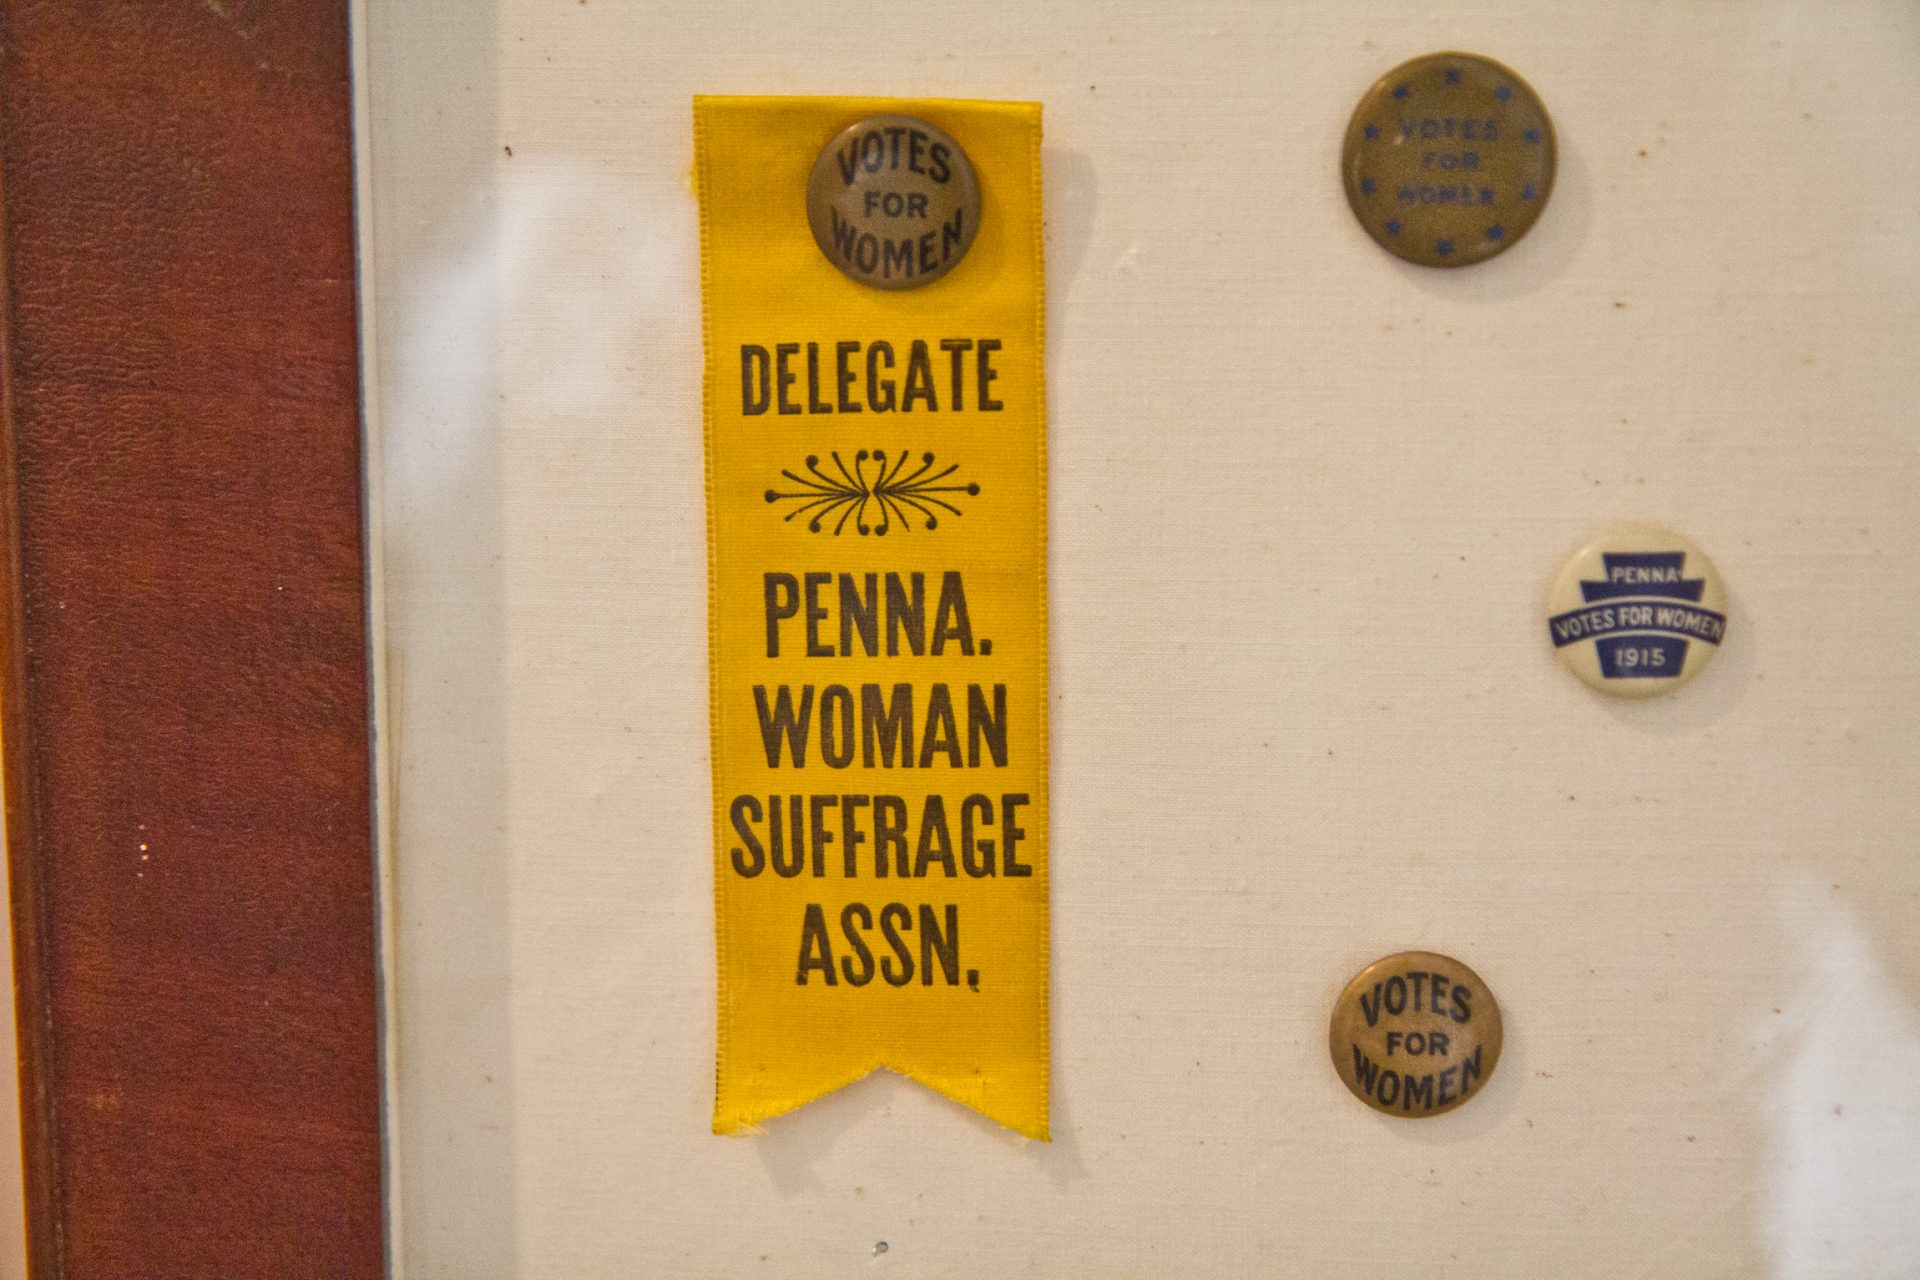 Artifacts from the women’s suffrage movement are on display at the Chester County Historical Society.